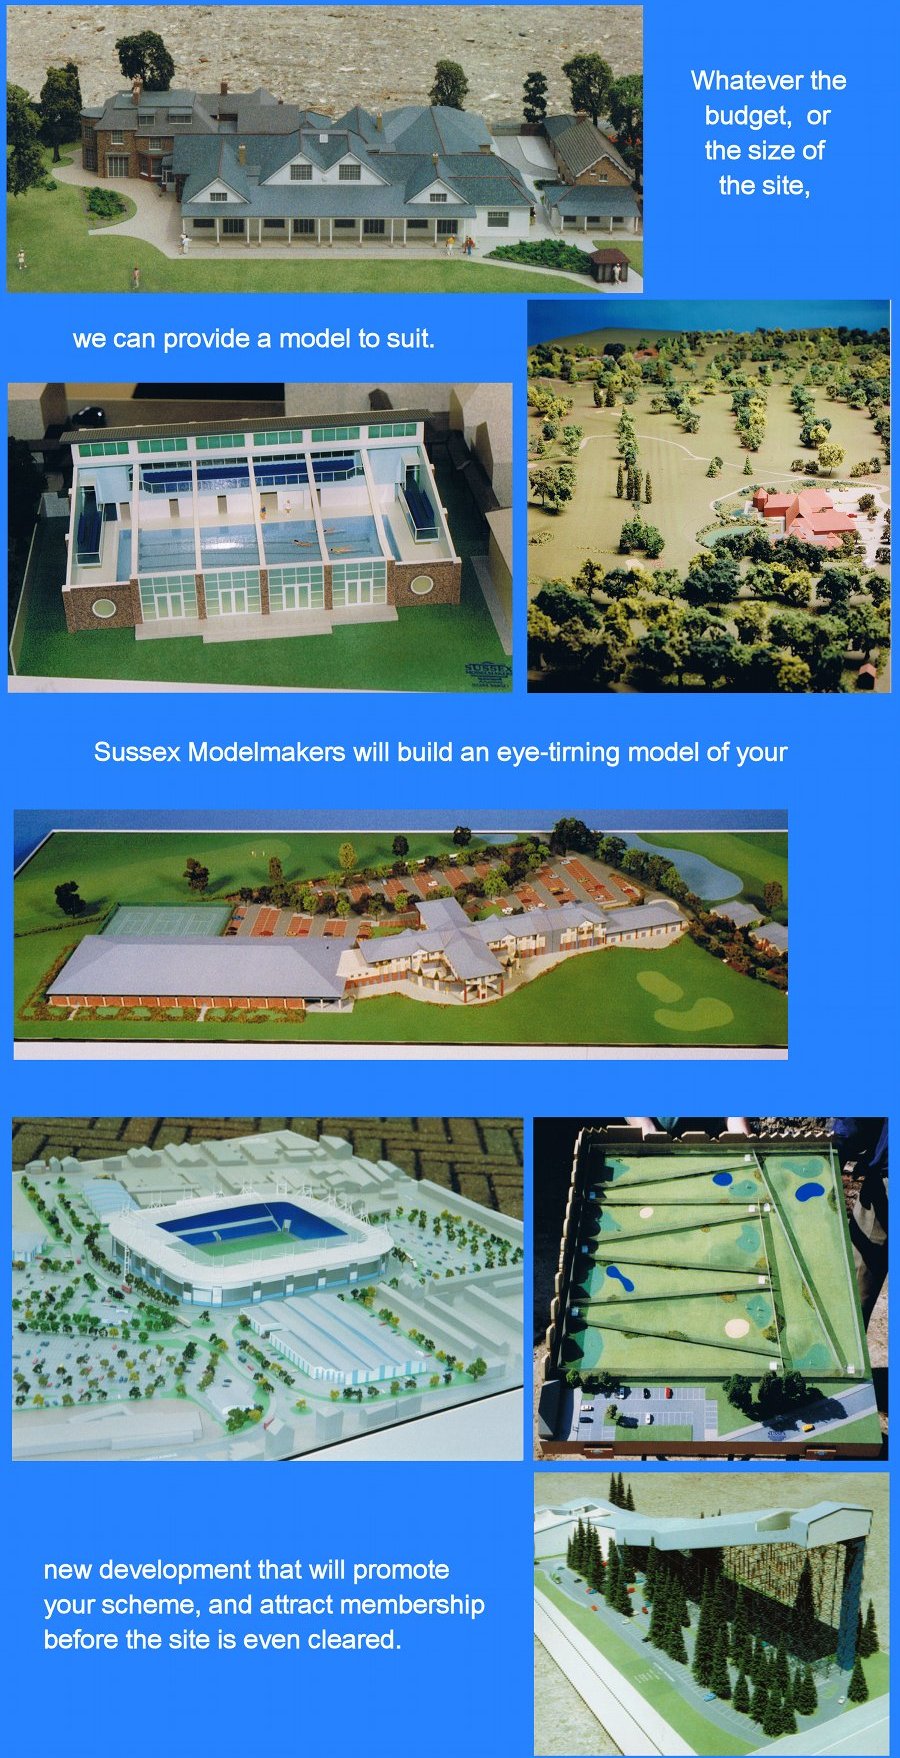 [Whatever the budget or size of the site, we can provide a model to suit. Sussex Modelmakers will build an eye-turning model of your new development that will promote your scheme and attract membership before the site is even cleared.]